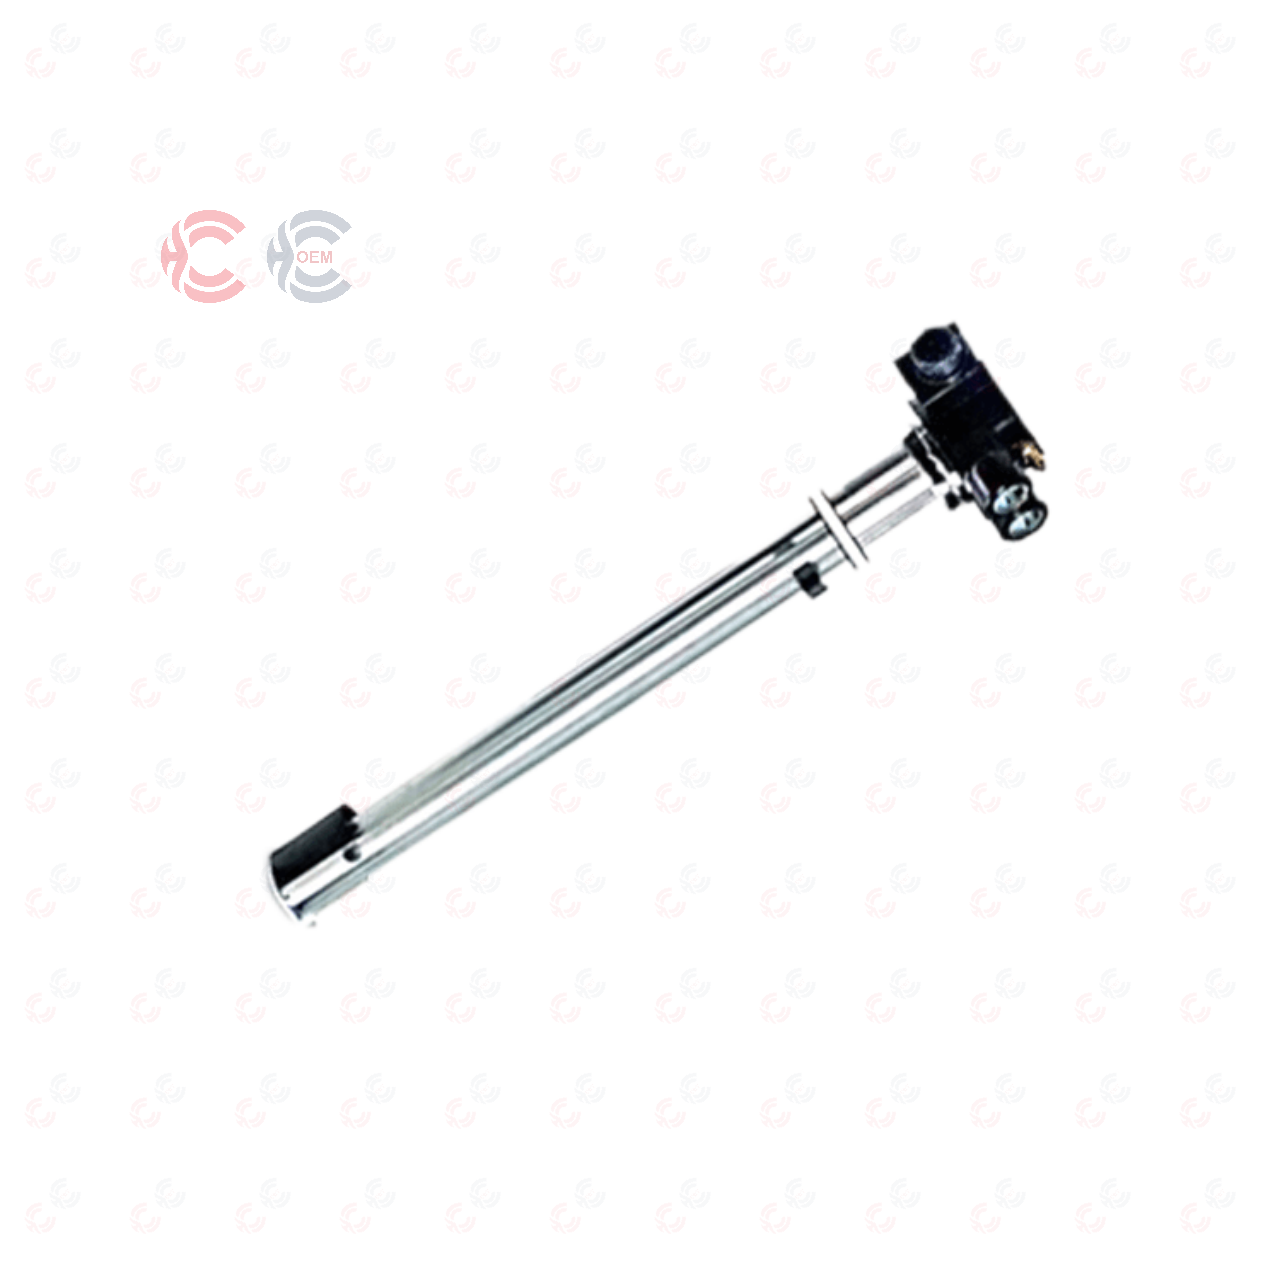 OEM: 41042853Material: ABS metalColor: Black GoldenOrigin: Made in ChinaWeight: 1000gPacking List: 1* Fuel Level Sensor More ServiceWe can provide OEM Manufacturing serviceWe can Be your one-step solution for Auto PartsWe can provide technical scheme for you Feel Free to Contact Us, we will get back to you as soon as possible.